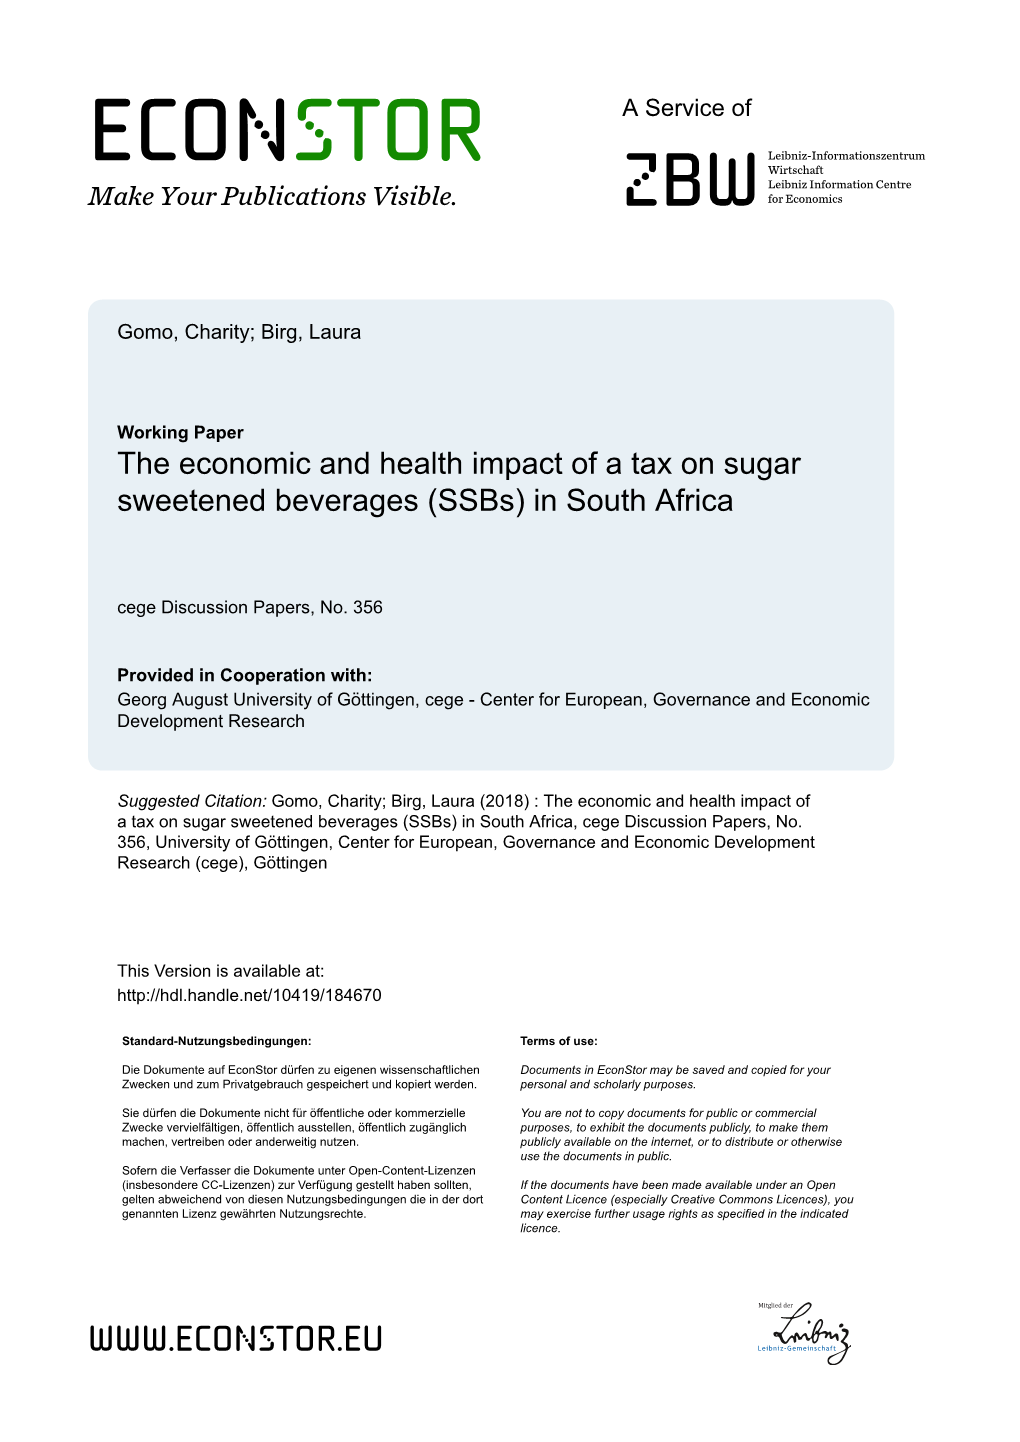 The Economic and Health Impact of a Tax on Sugar Sweetened Beverages (Ssbs) in South Africa